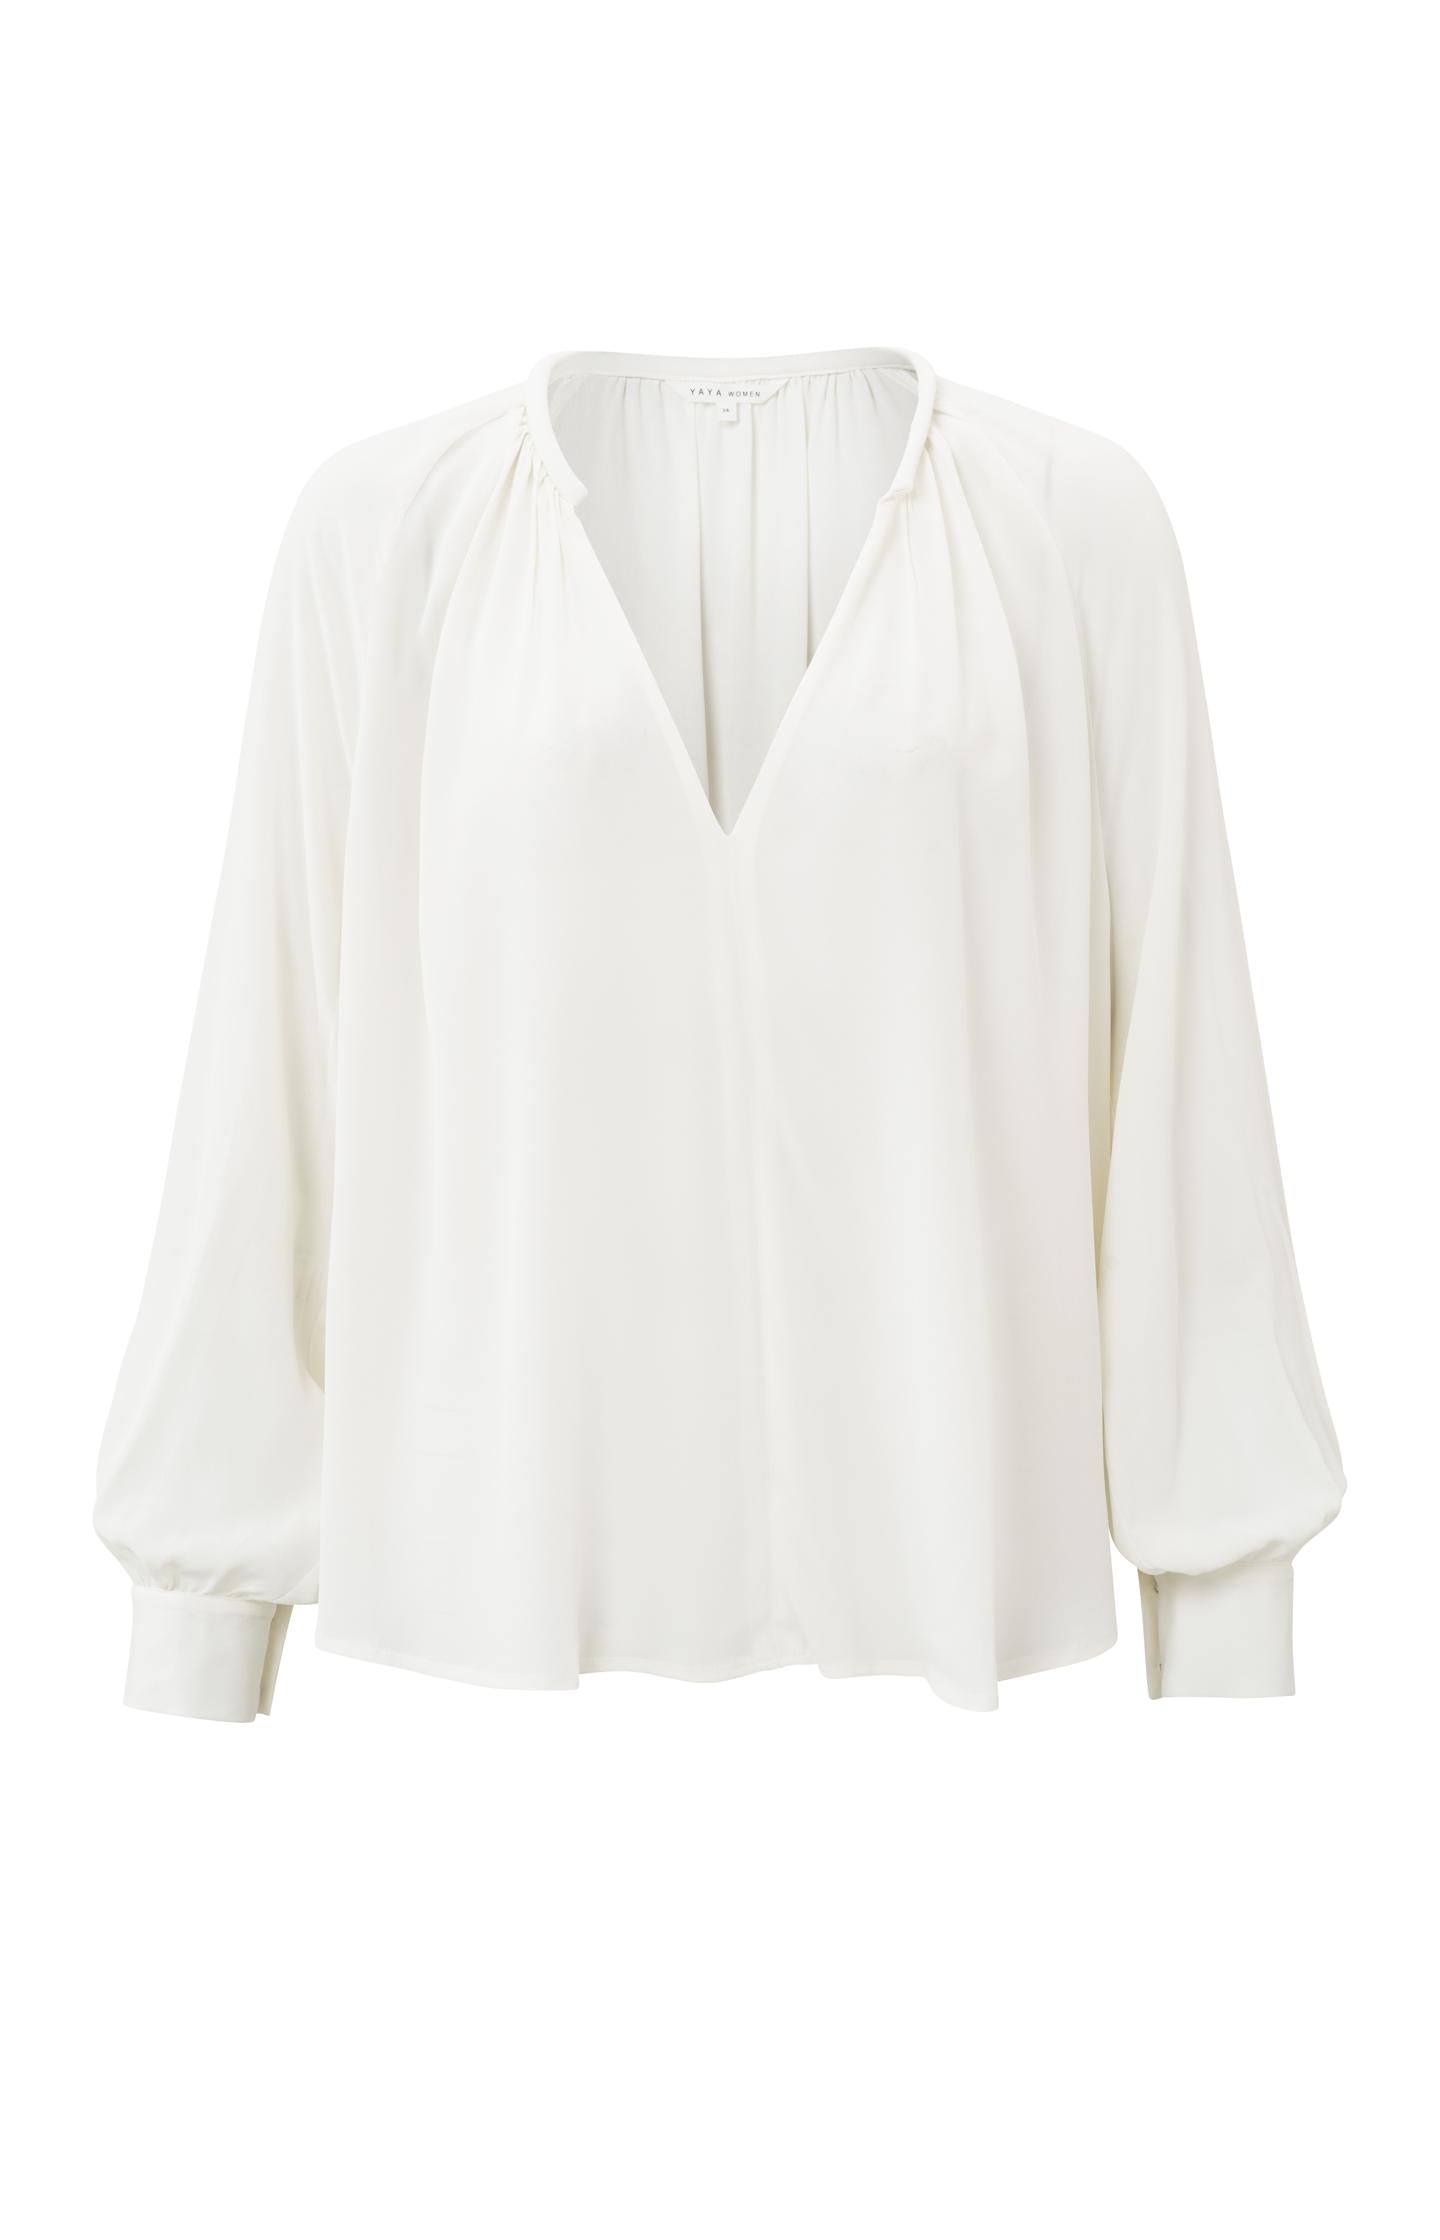 Top with V-neck, long balloon sleeves and pleated details - Type: product